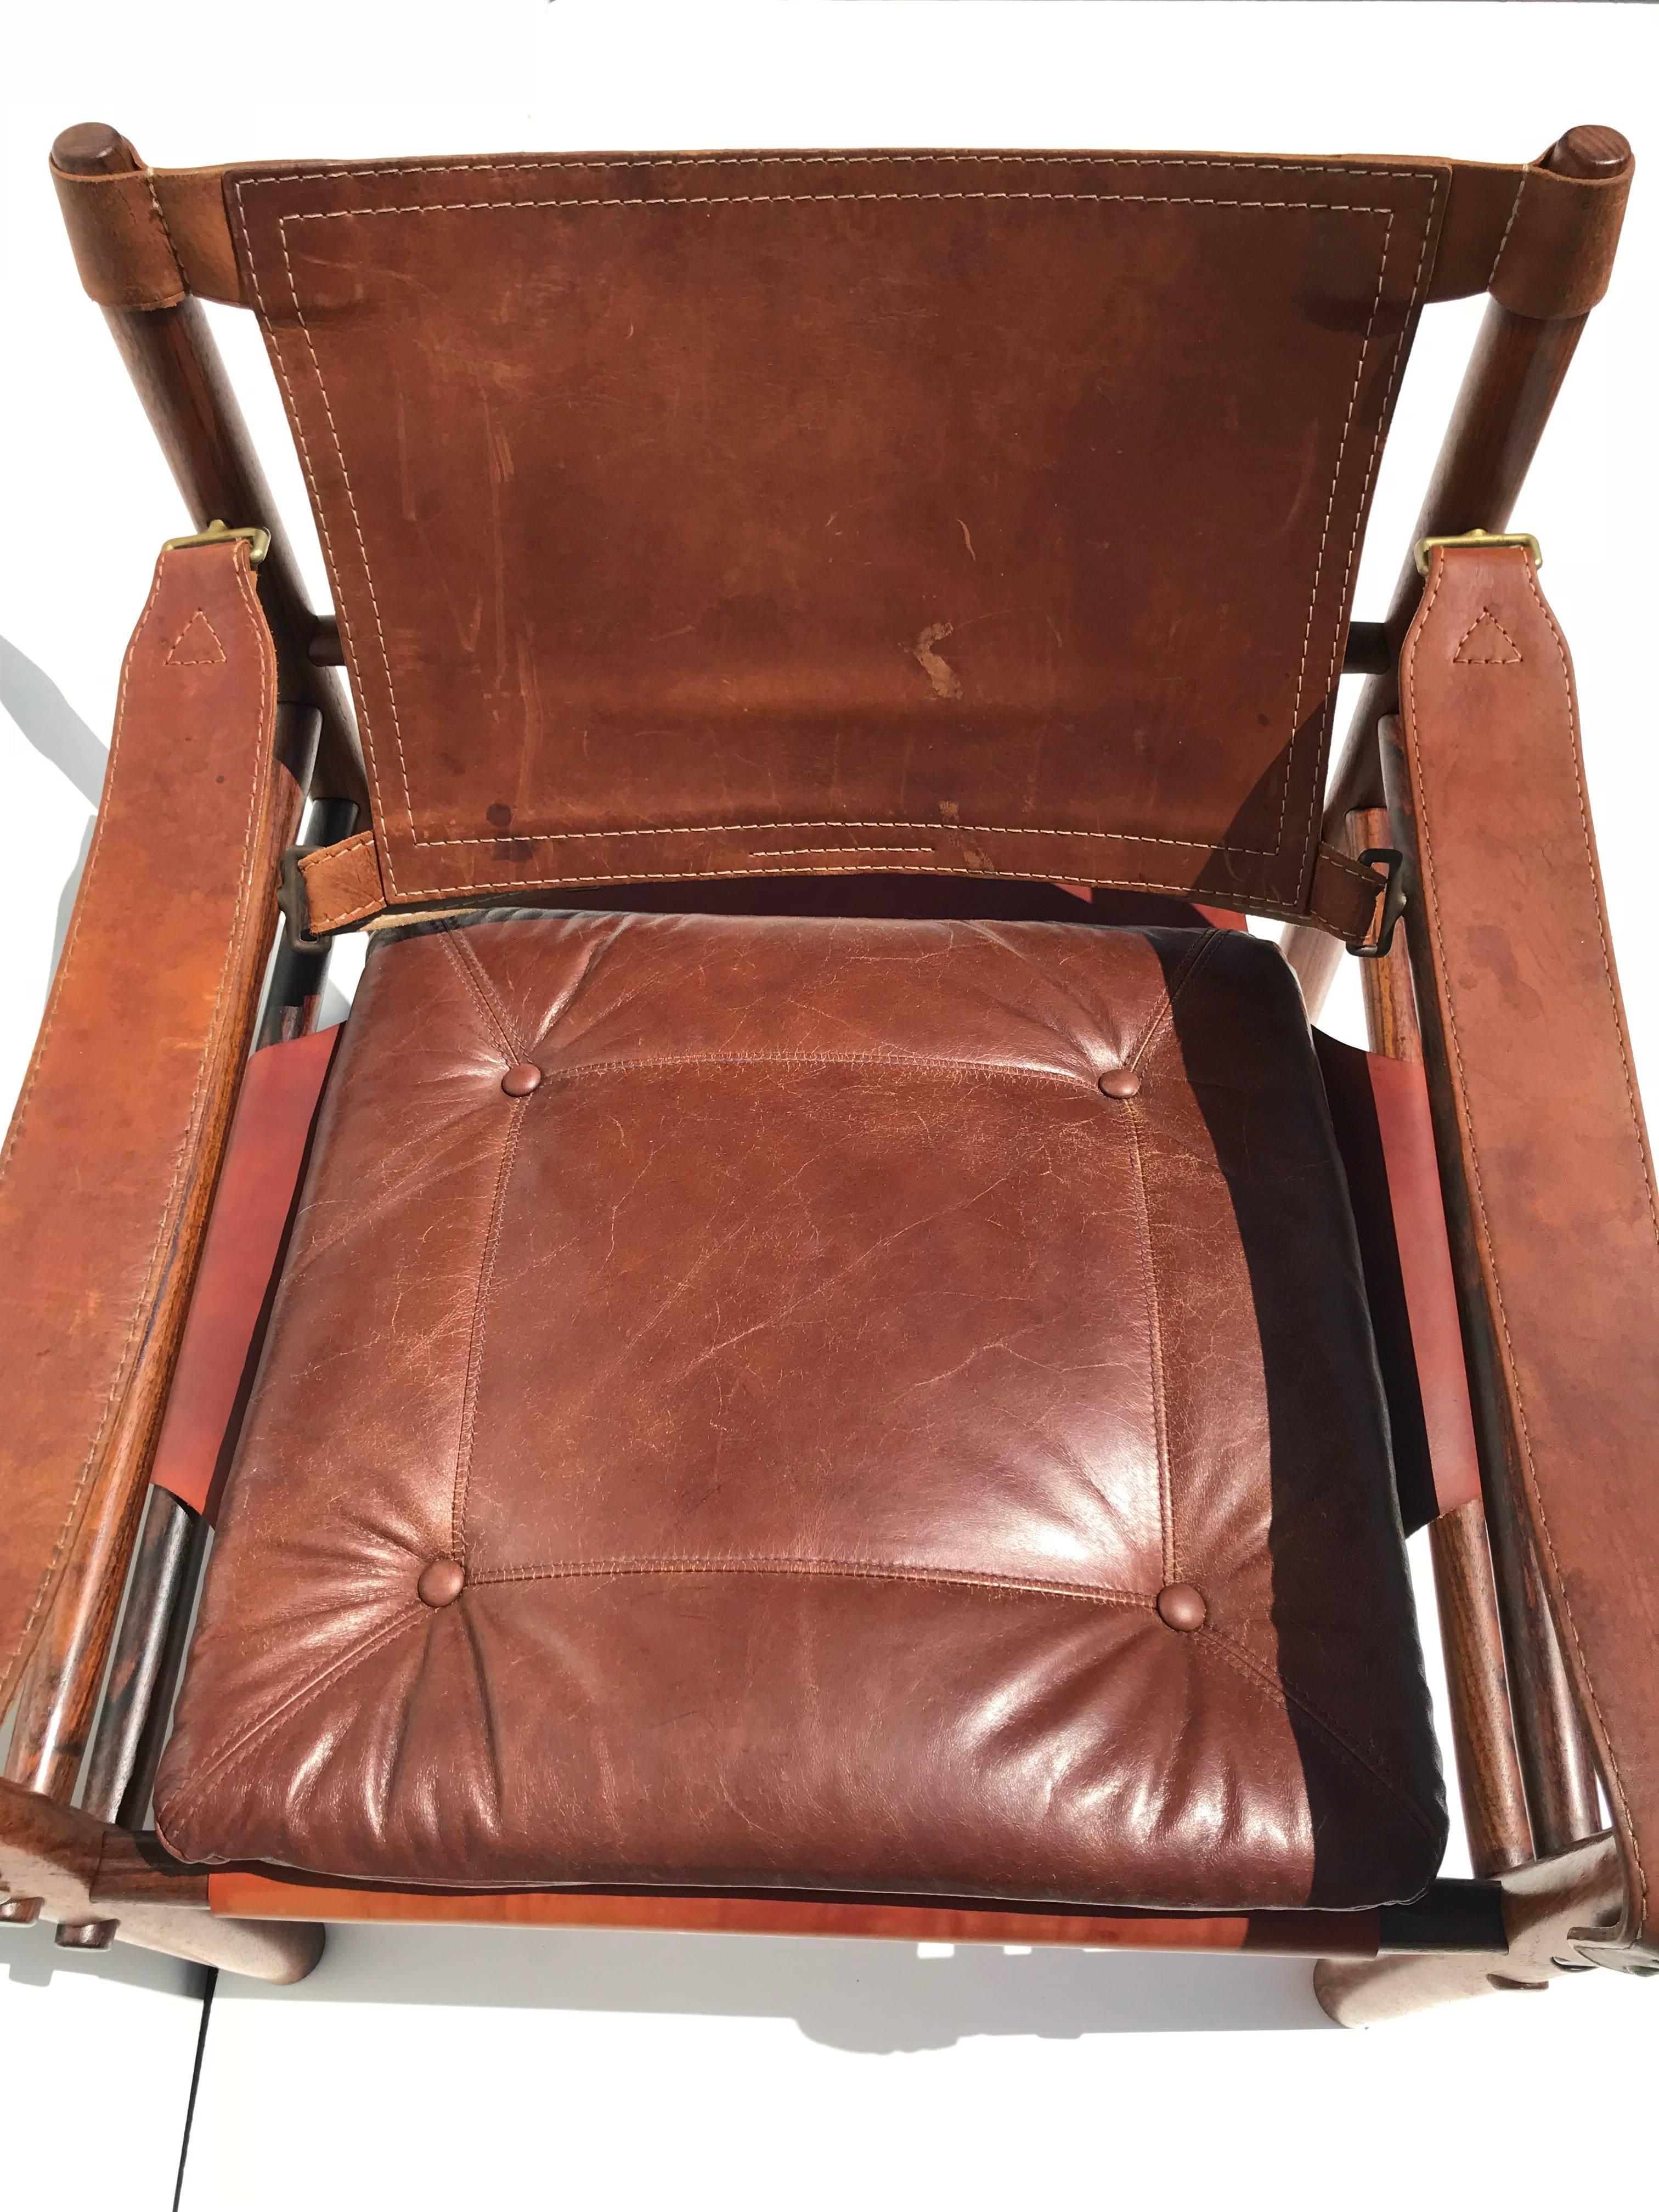 Pair of Arne Norell Rosewood Sirocco Safari Chairs 1